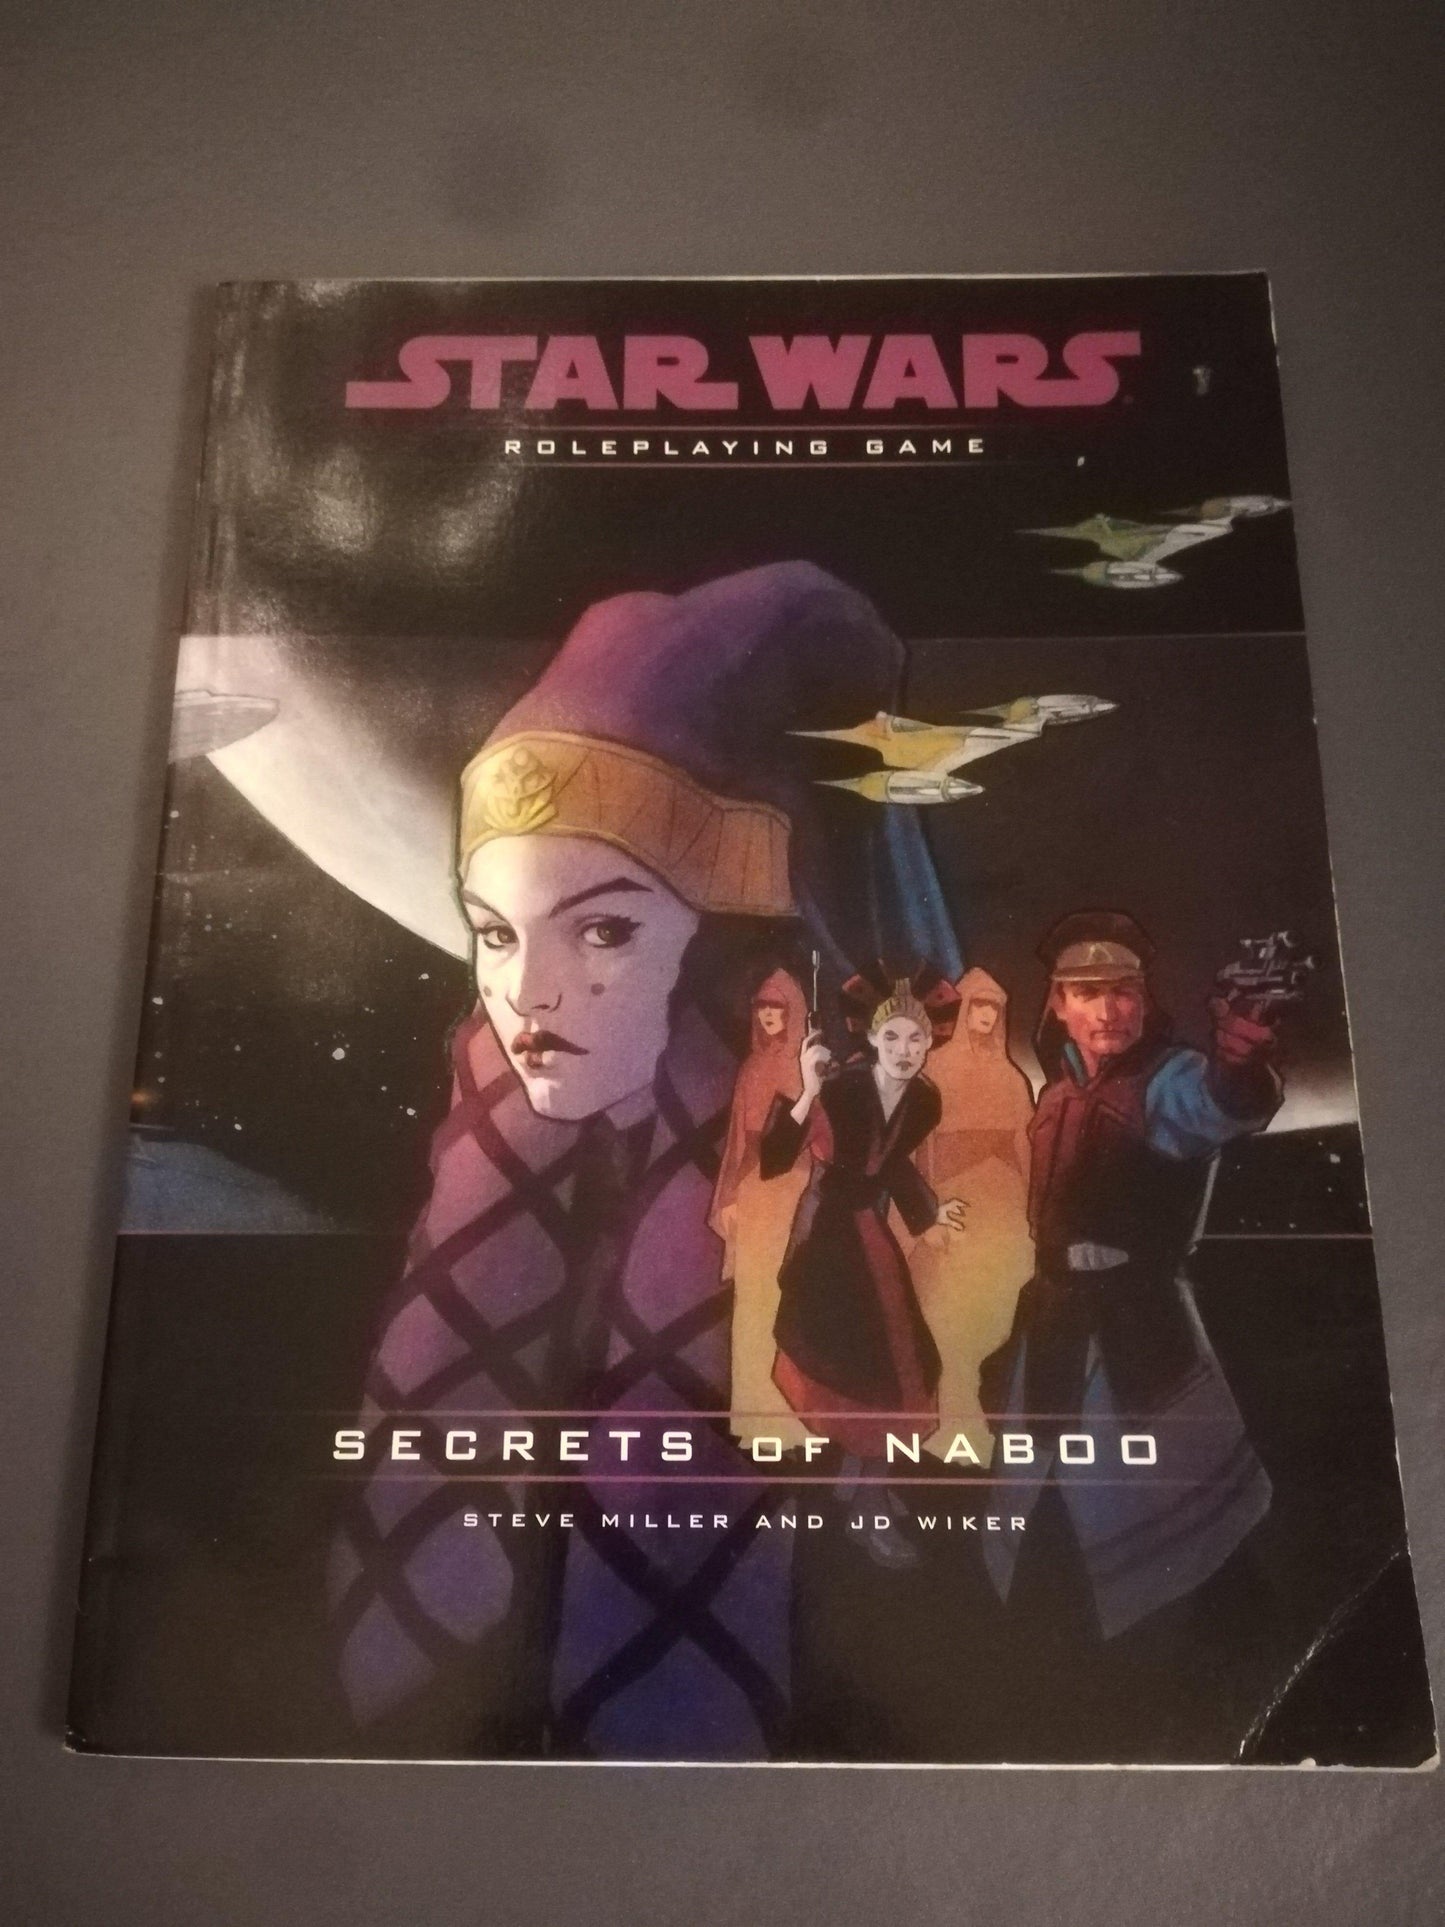 Star Wars: The Secrets of Naboo books AllRoleplaying.com 